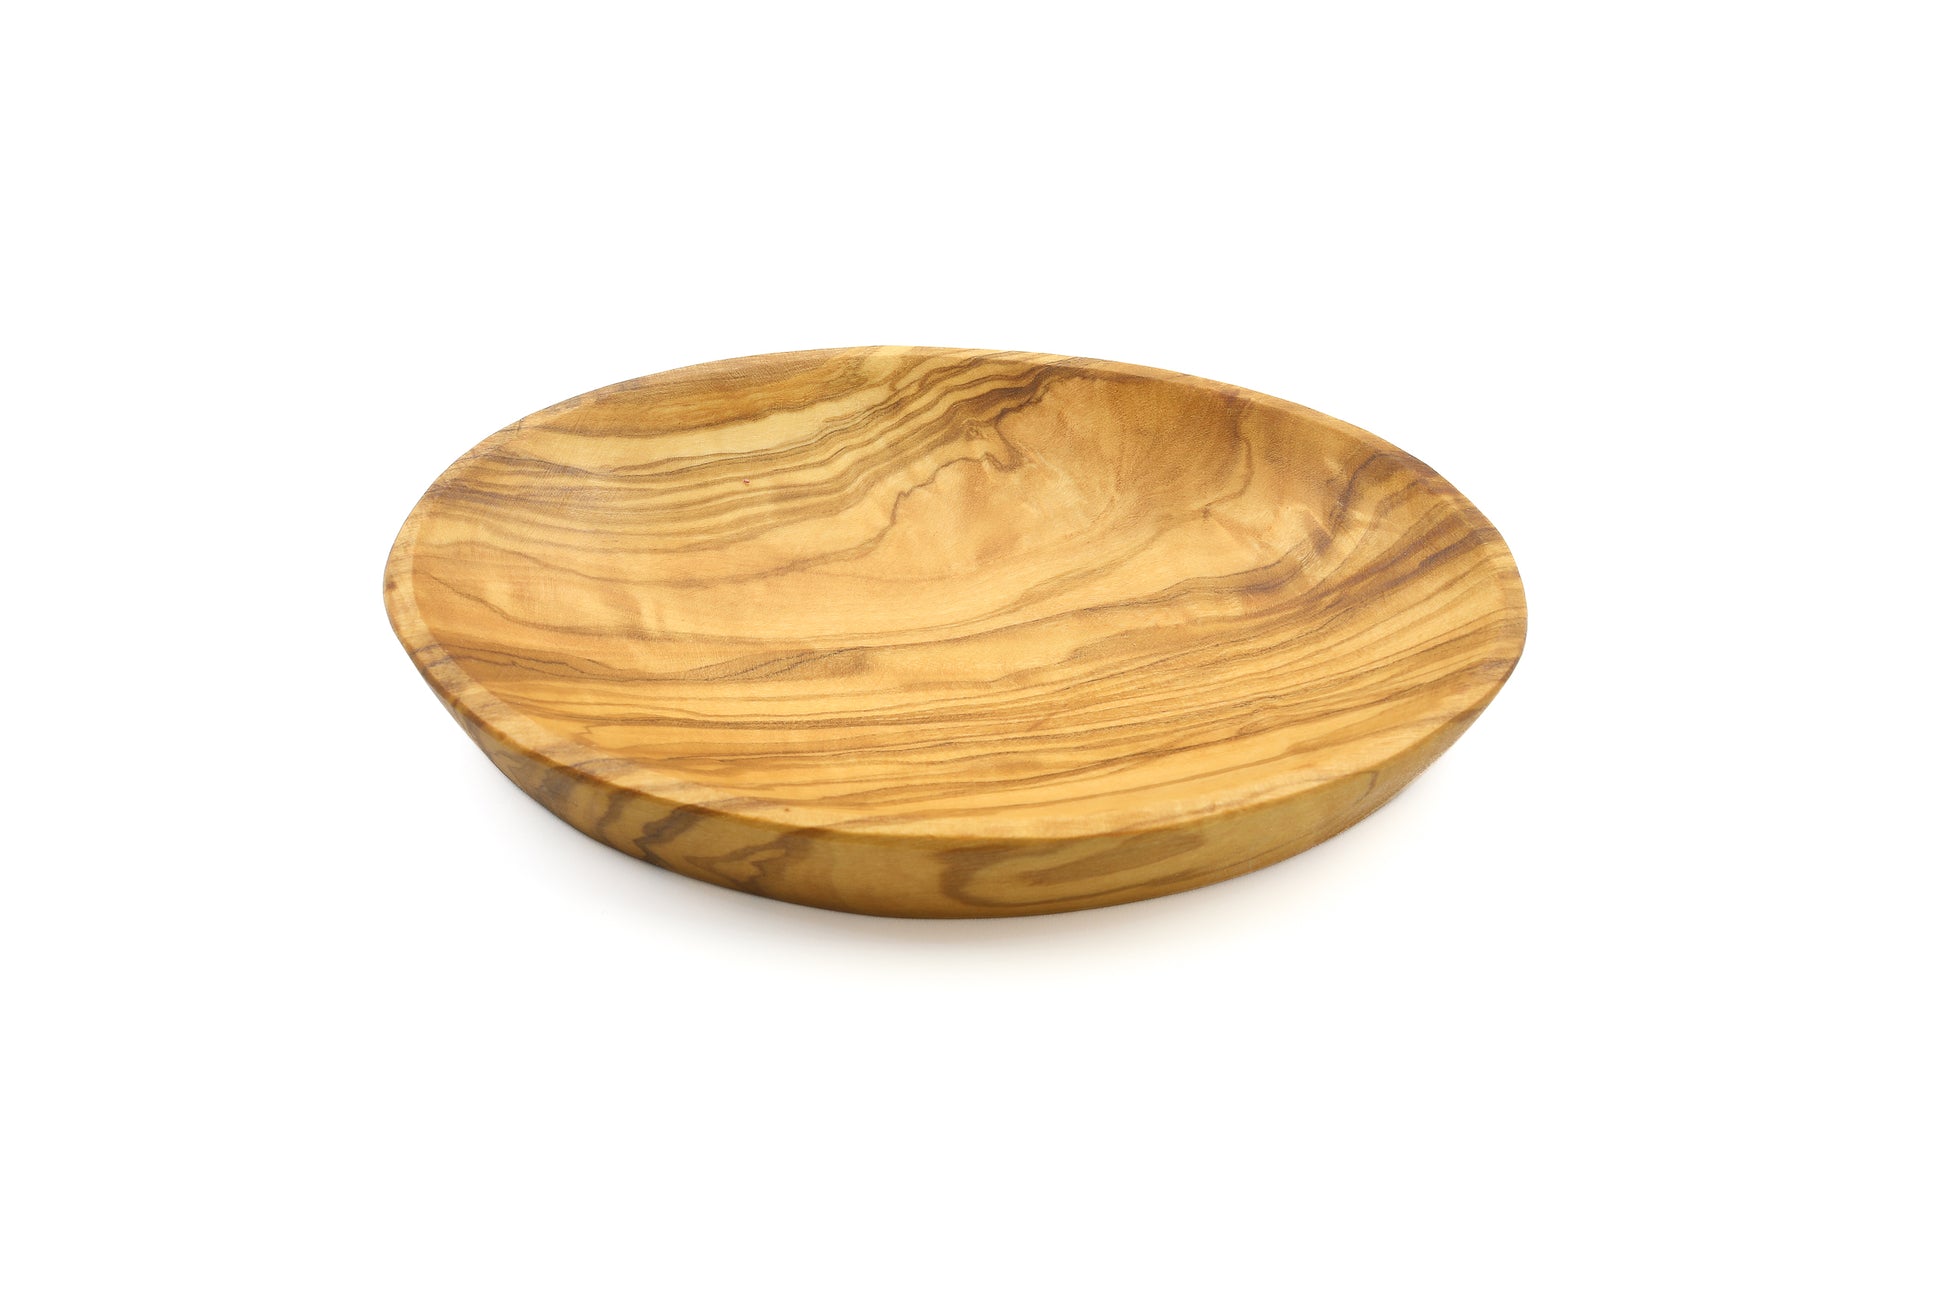 Unique handmade olive wood oval bowl and picker set